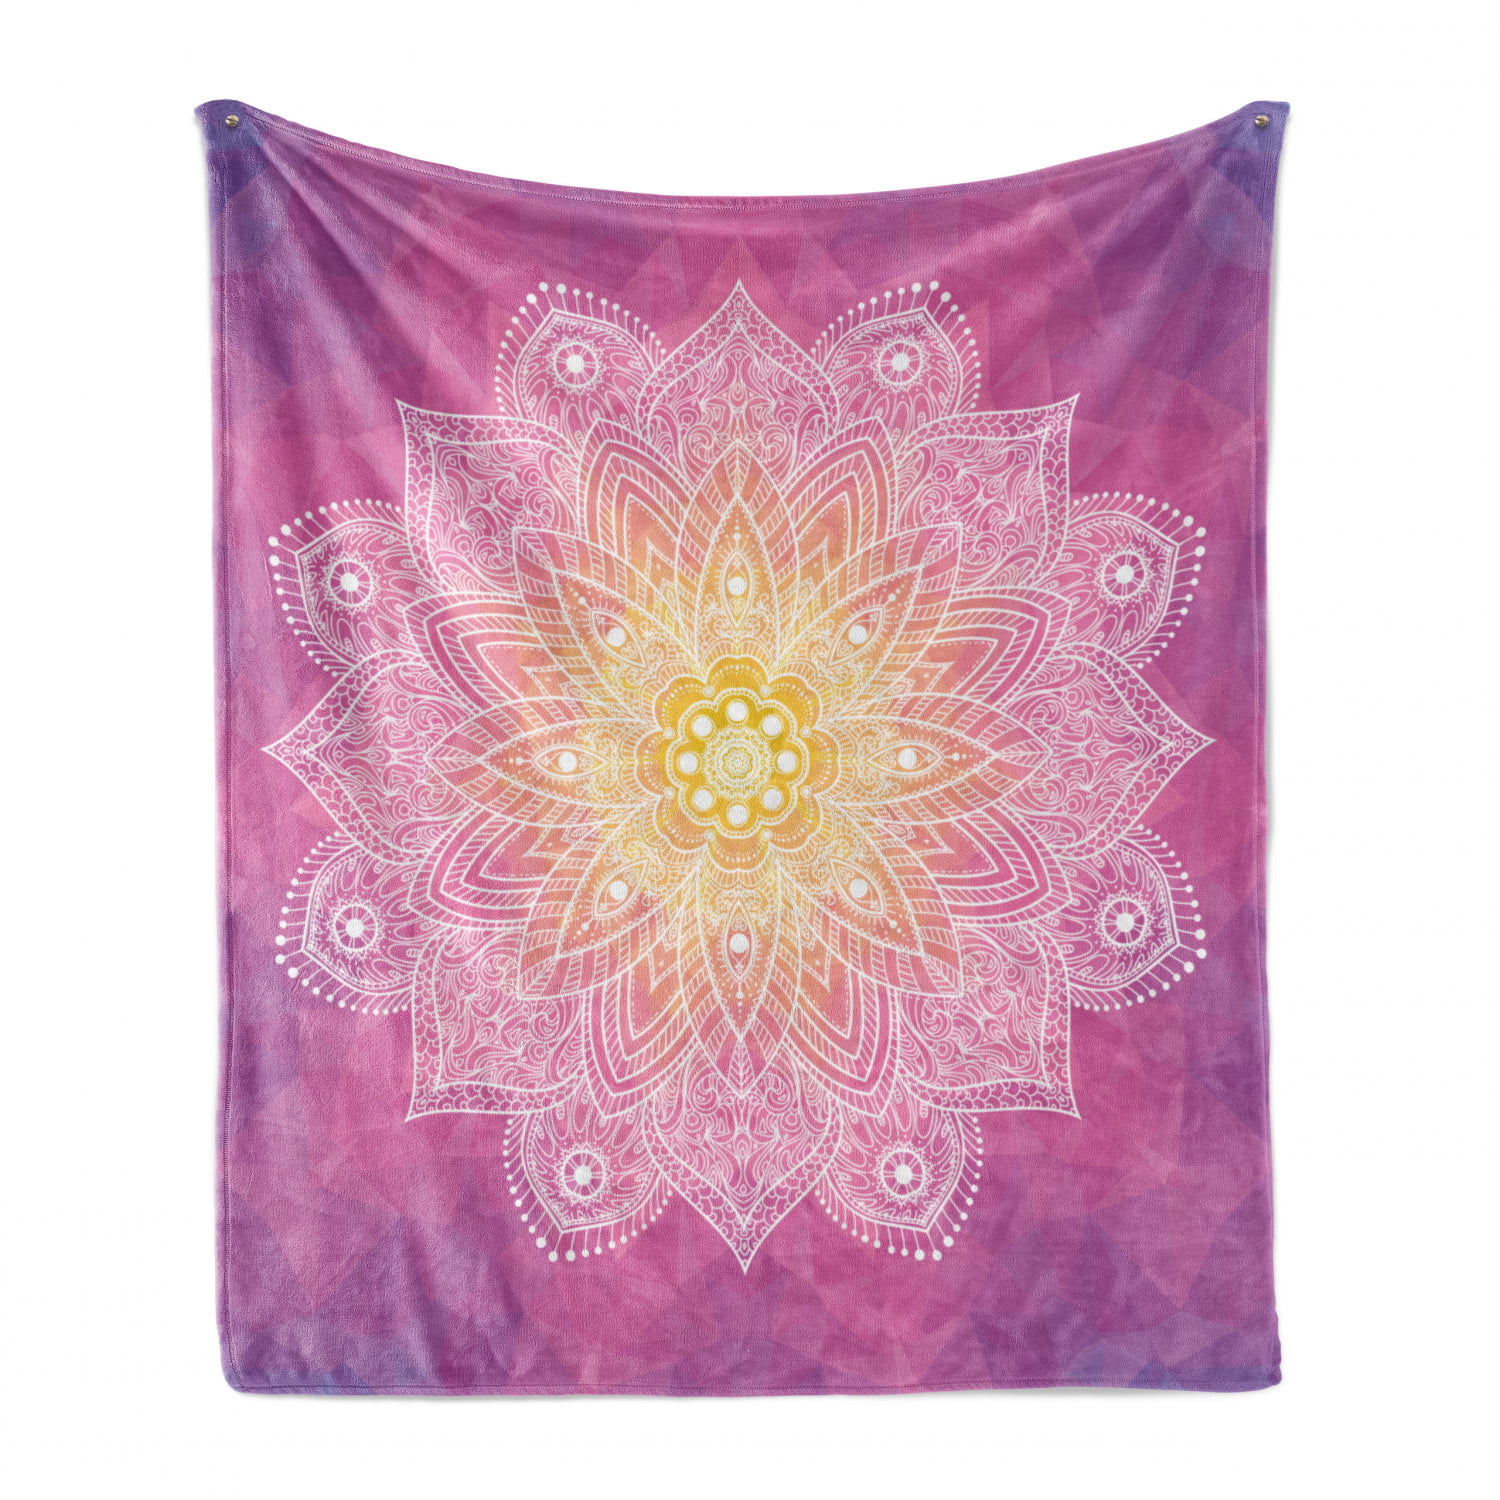 Vermilion Fuchsia 60 x 80 Psychedelic Vibrant Colored Mandala Historical Art Elements Cozy Plush for Indoor and Outdoor Use Ambesonne Mandala Soft Flannel Fleece Throw Blanket 